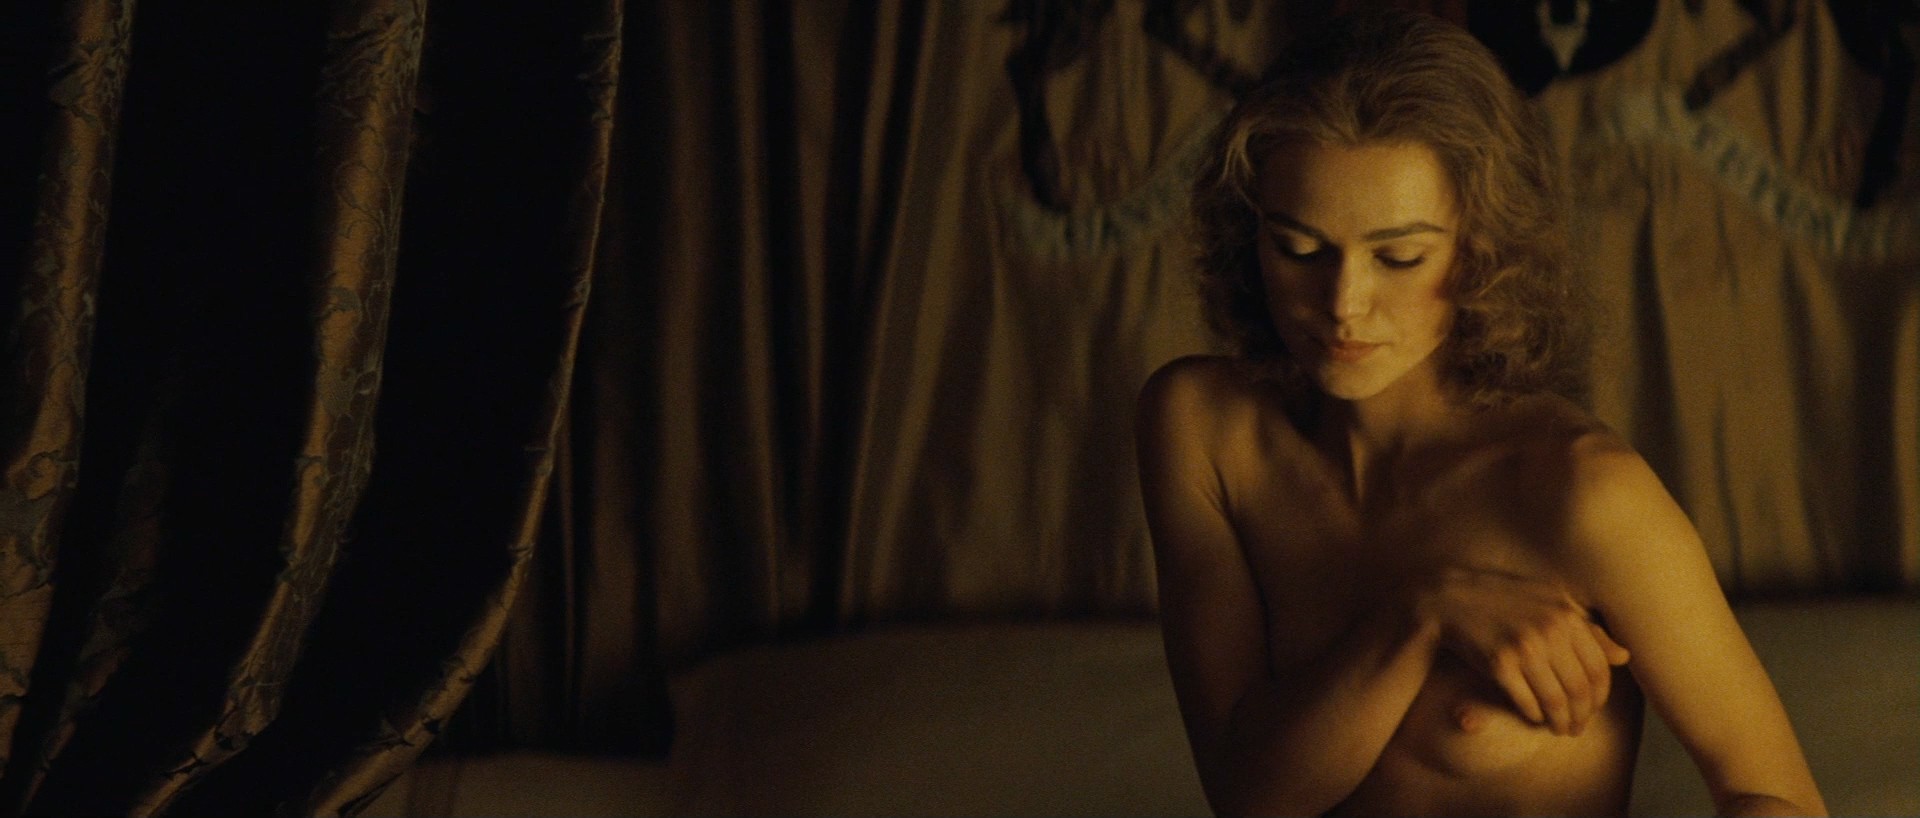 Keira Knightley Nude Debut In The Hole Enhanced